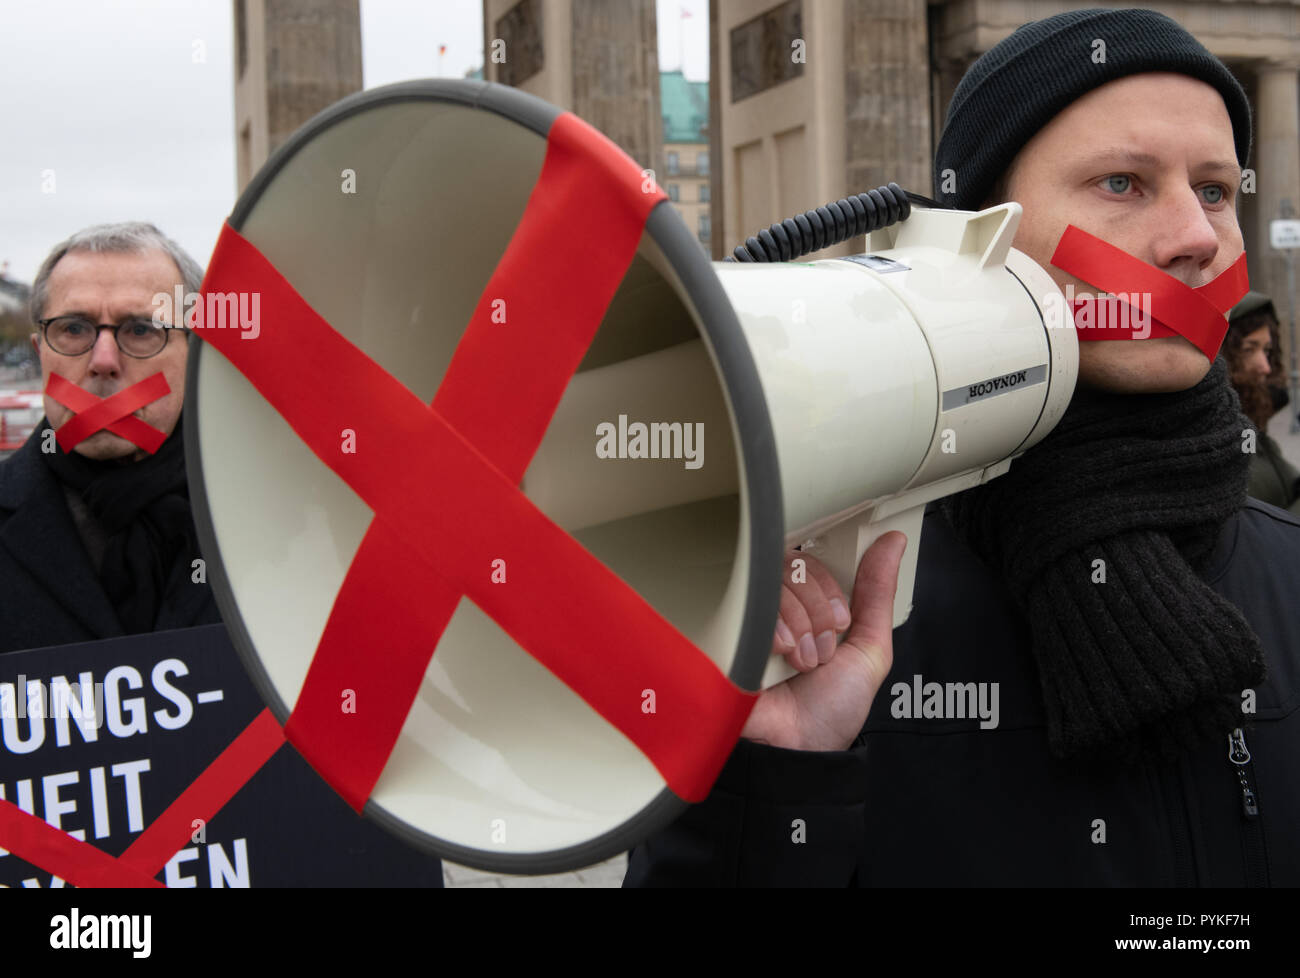 Berlin, Germany. 29th Oct, 2018. Amnesty International activists protest on the sidelines of the Egyptian President's visit to the Brandenburg Gate against human rights violations in Egypt and for freedom of expression in the country in North Africa. Credit: Paul Zinken/dpa/Alamy Live News Stock Photo